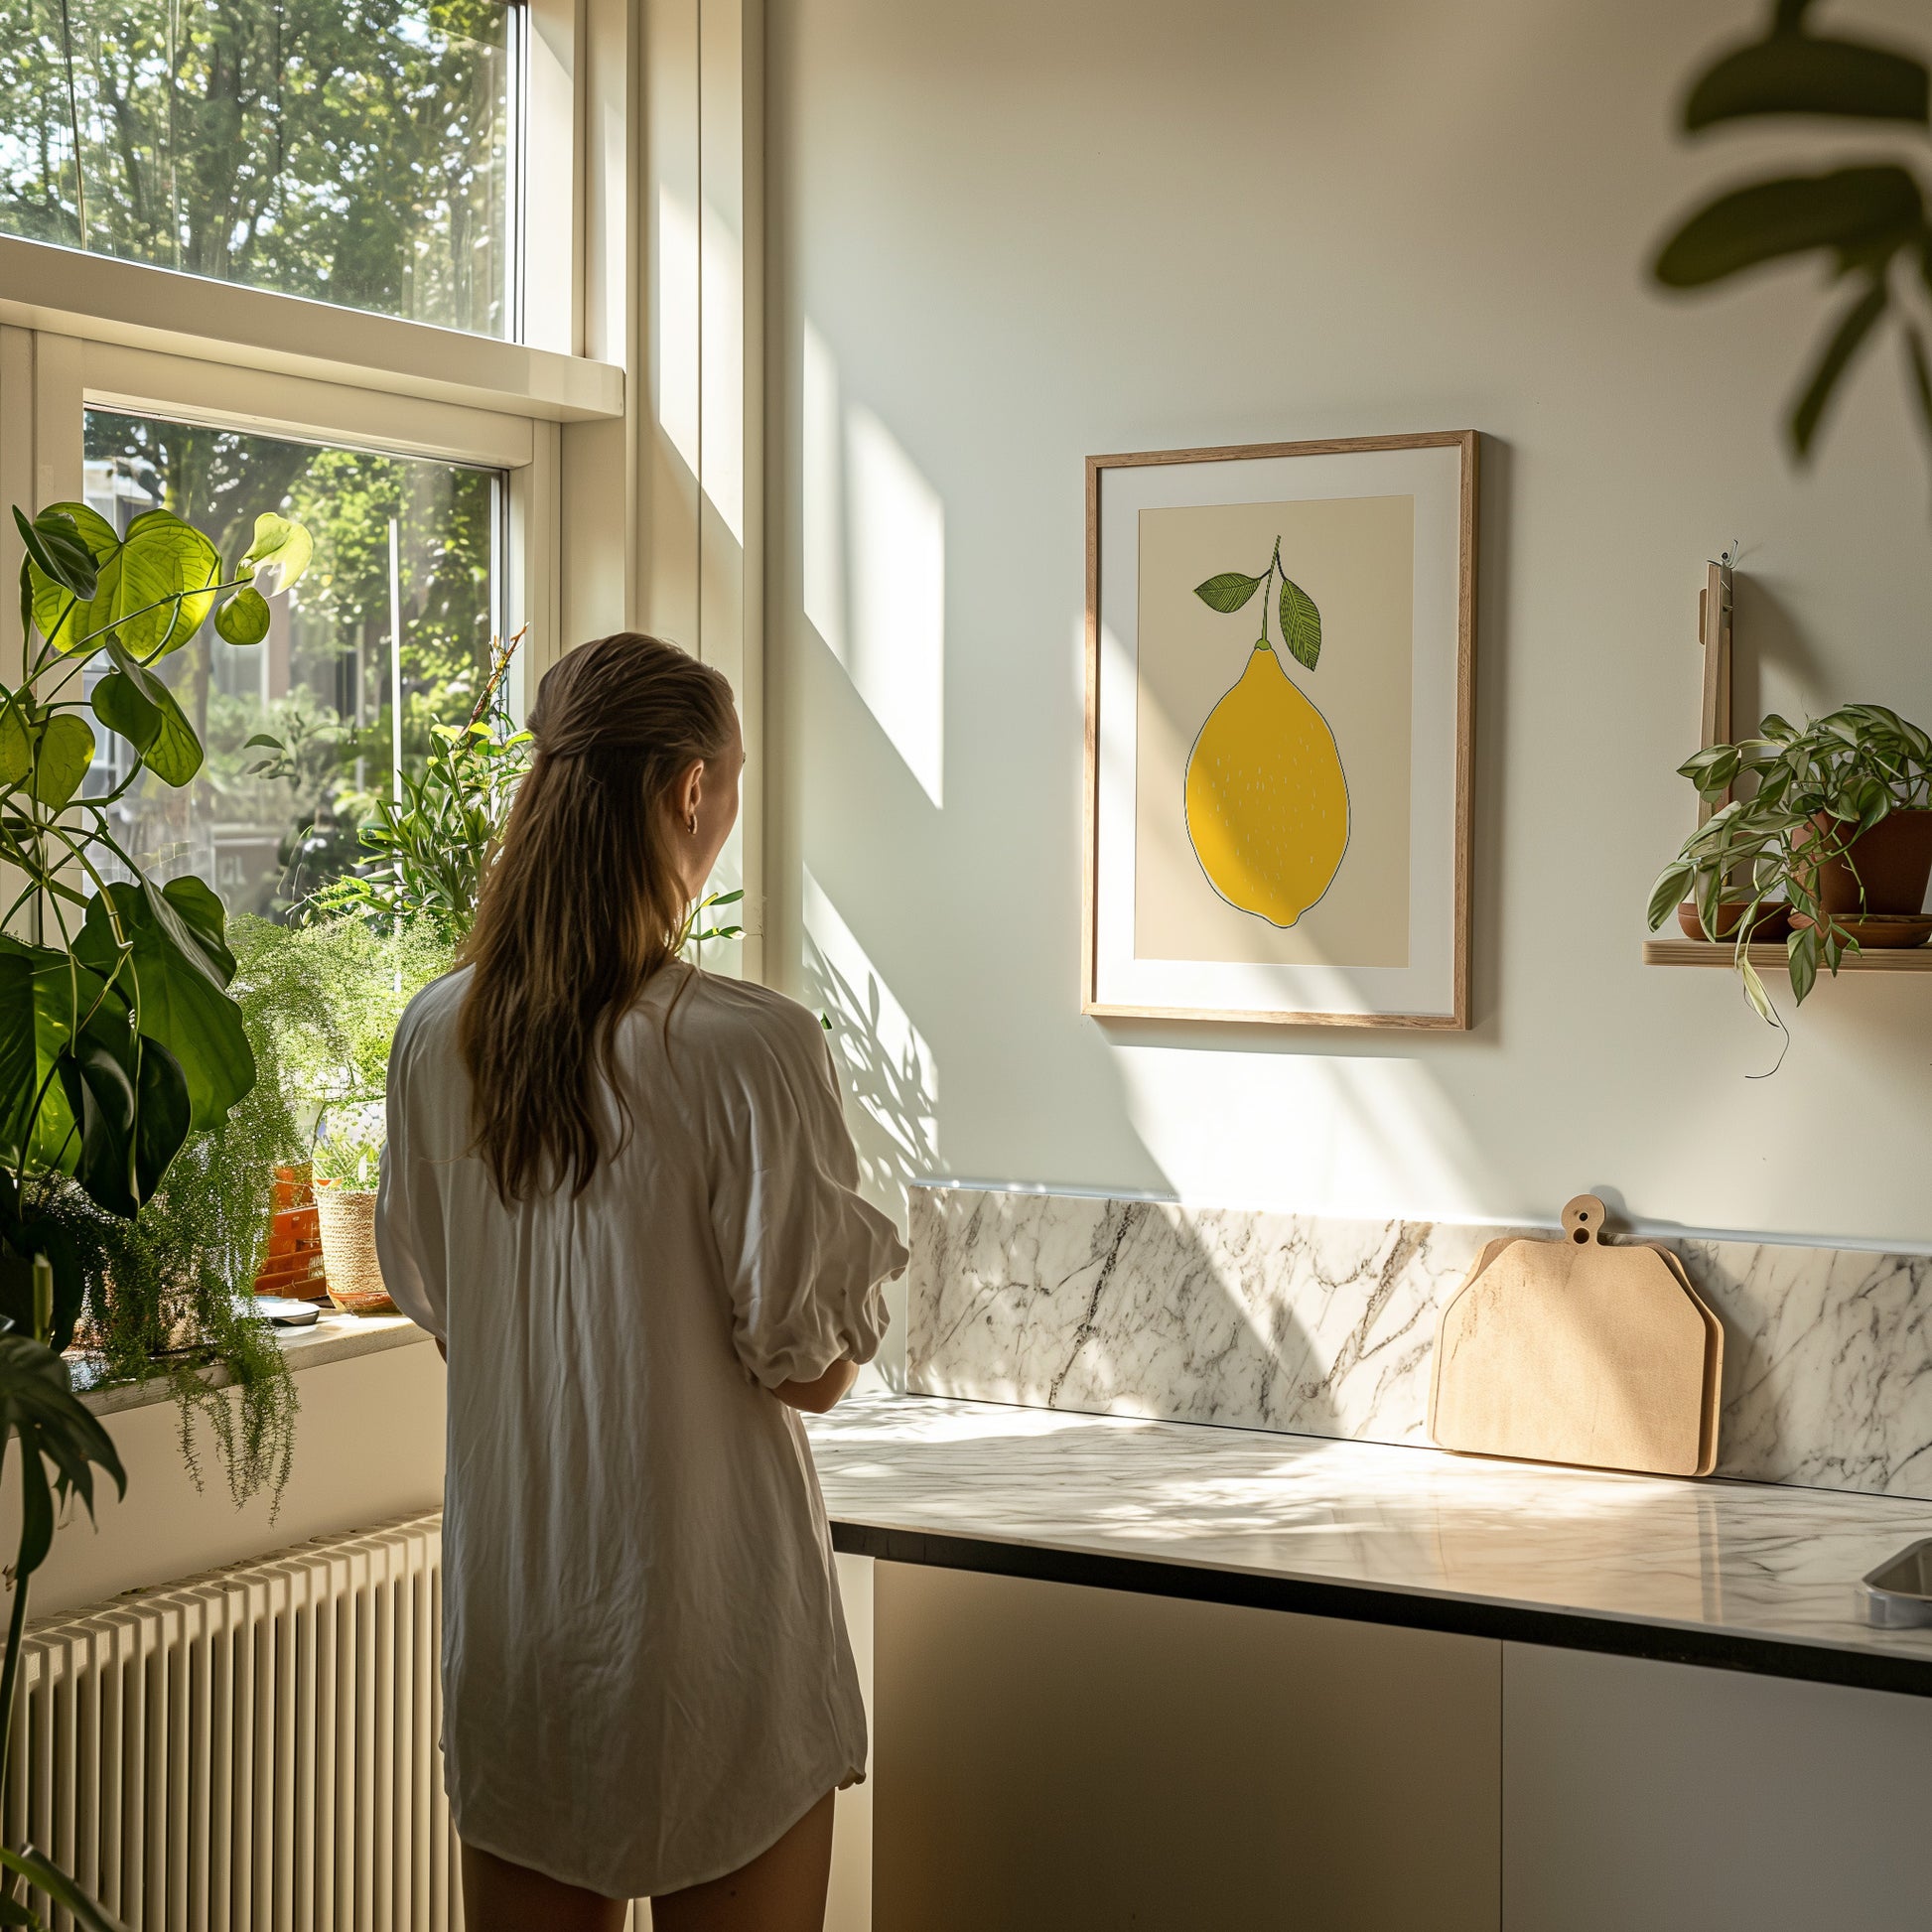 A person in a white shirt looking out a sunlit window in a room with plants and a lemon artwork.